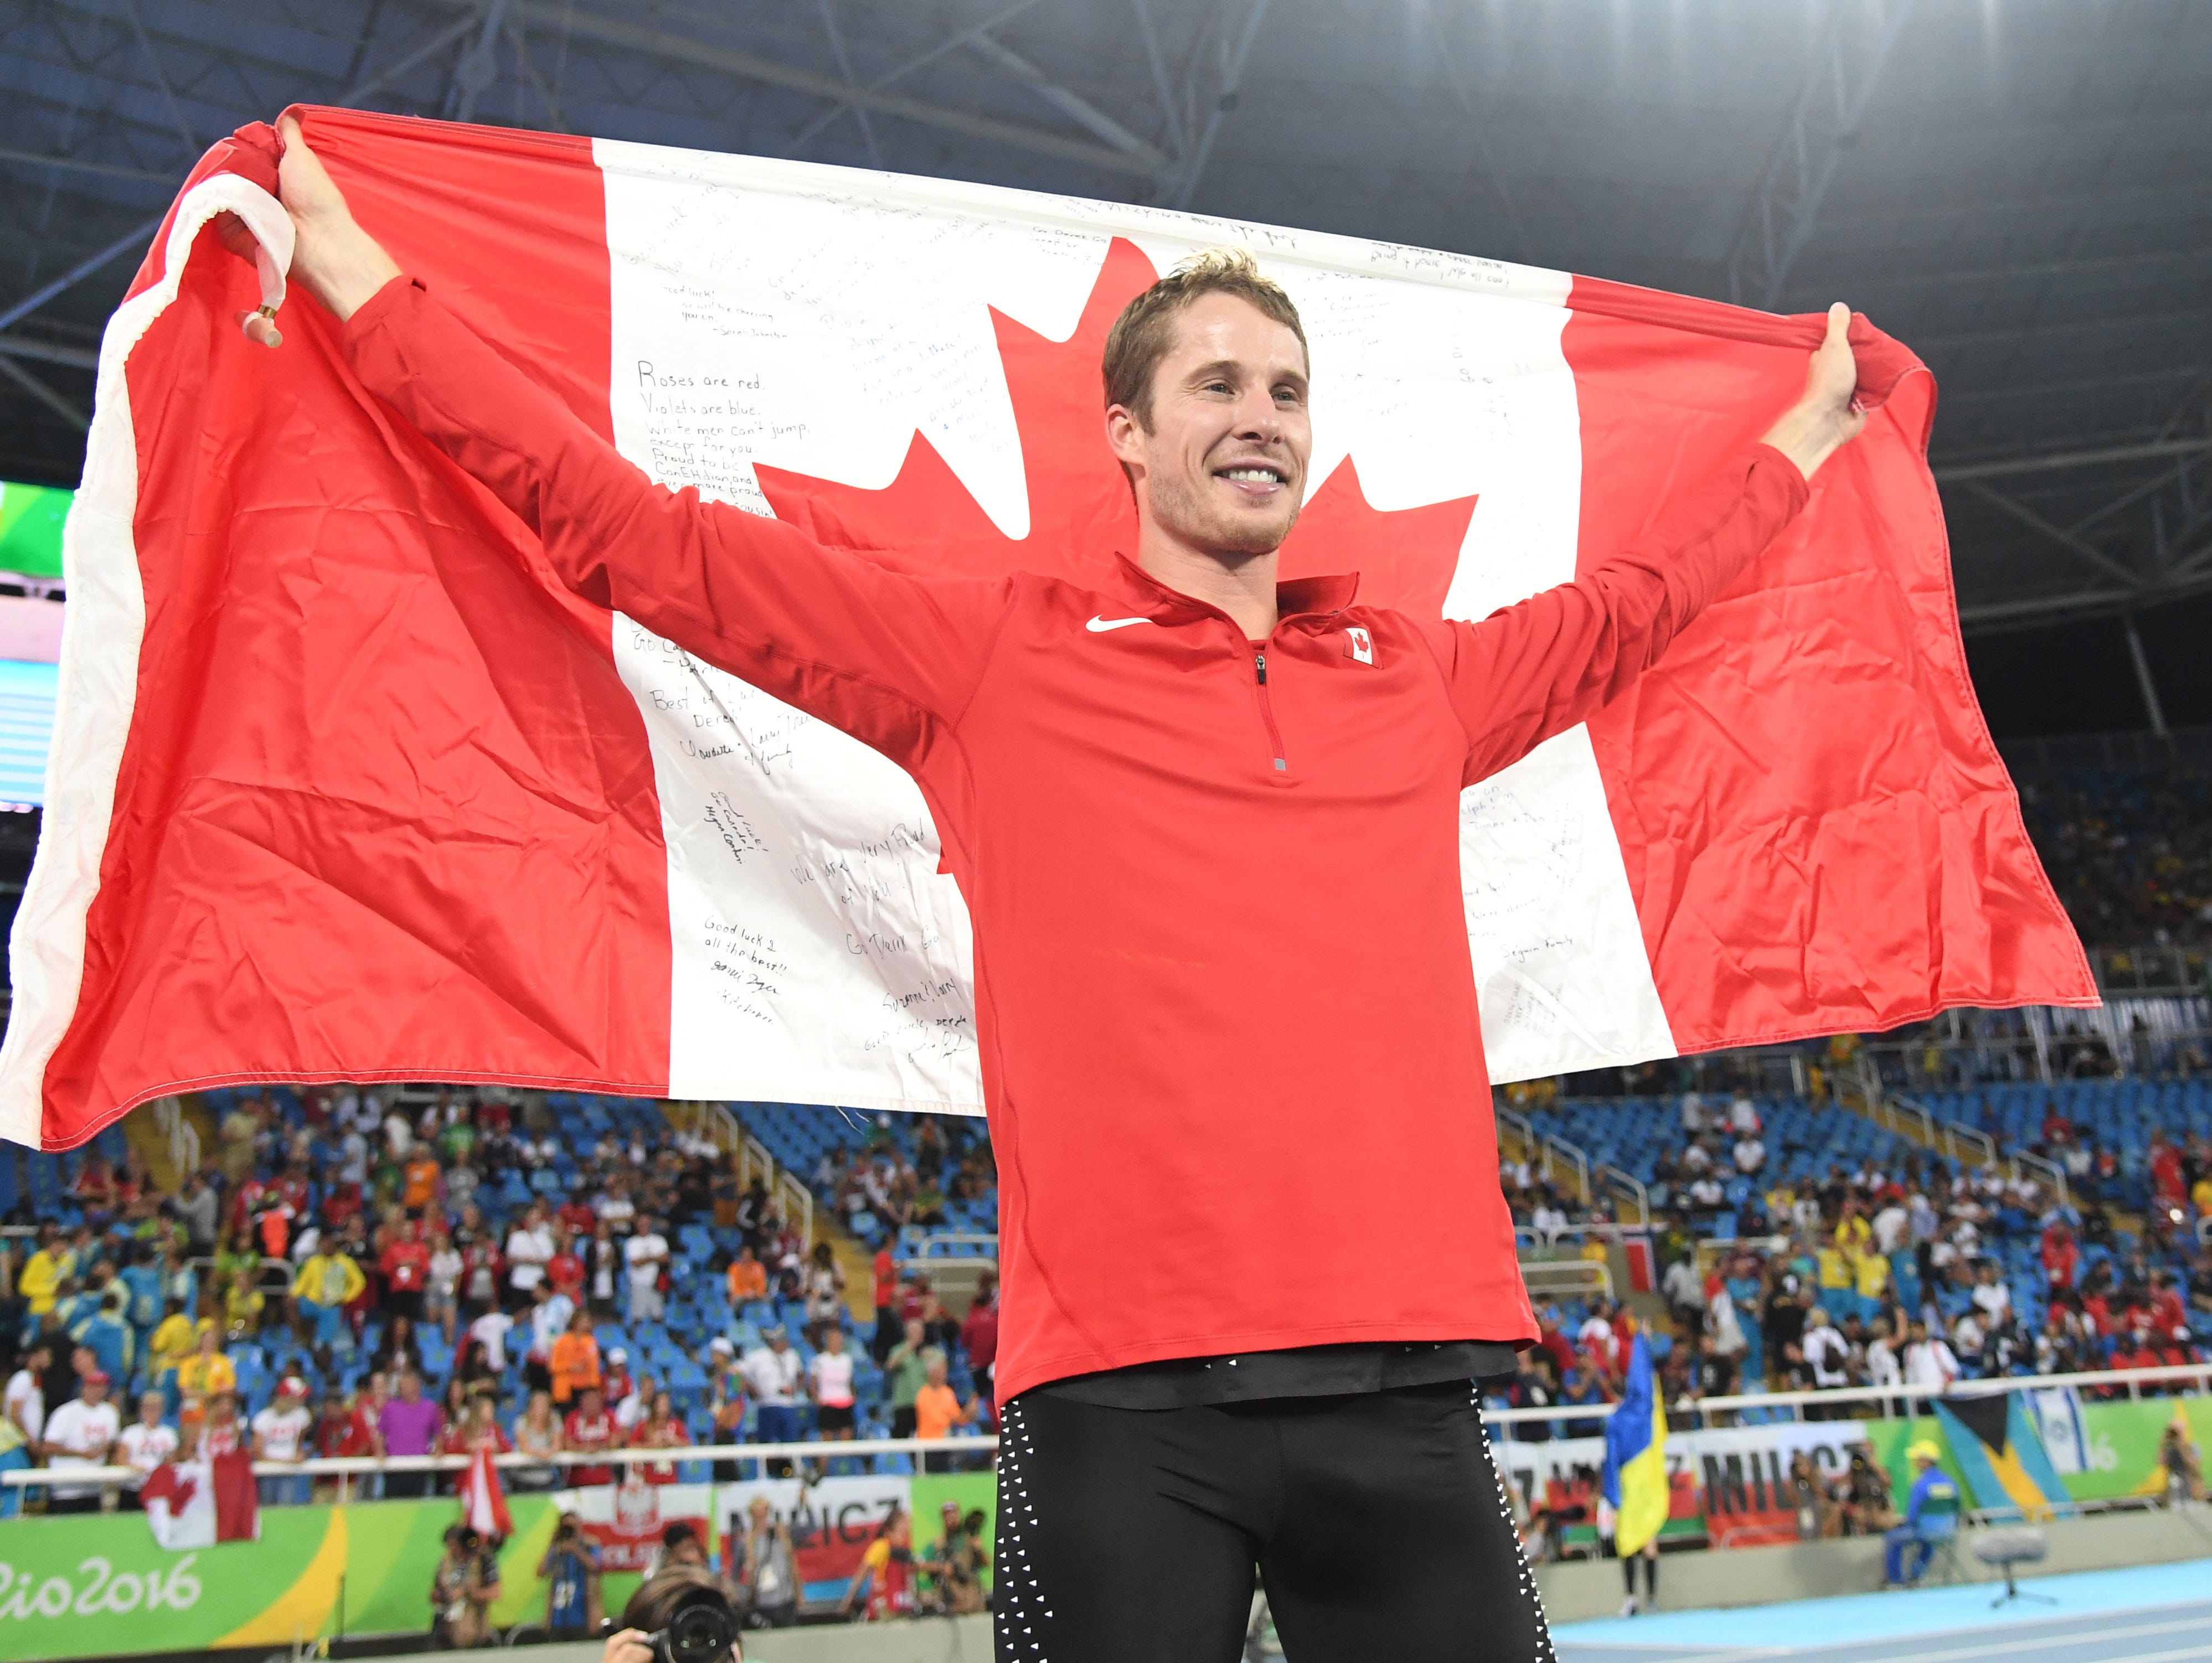 Derek Drouin (CAN) wins gold during the men's high jump final in track and field competition in the Rio 2016 Summer Olympic Games at Estadio Olimpico Joao Havelange.